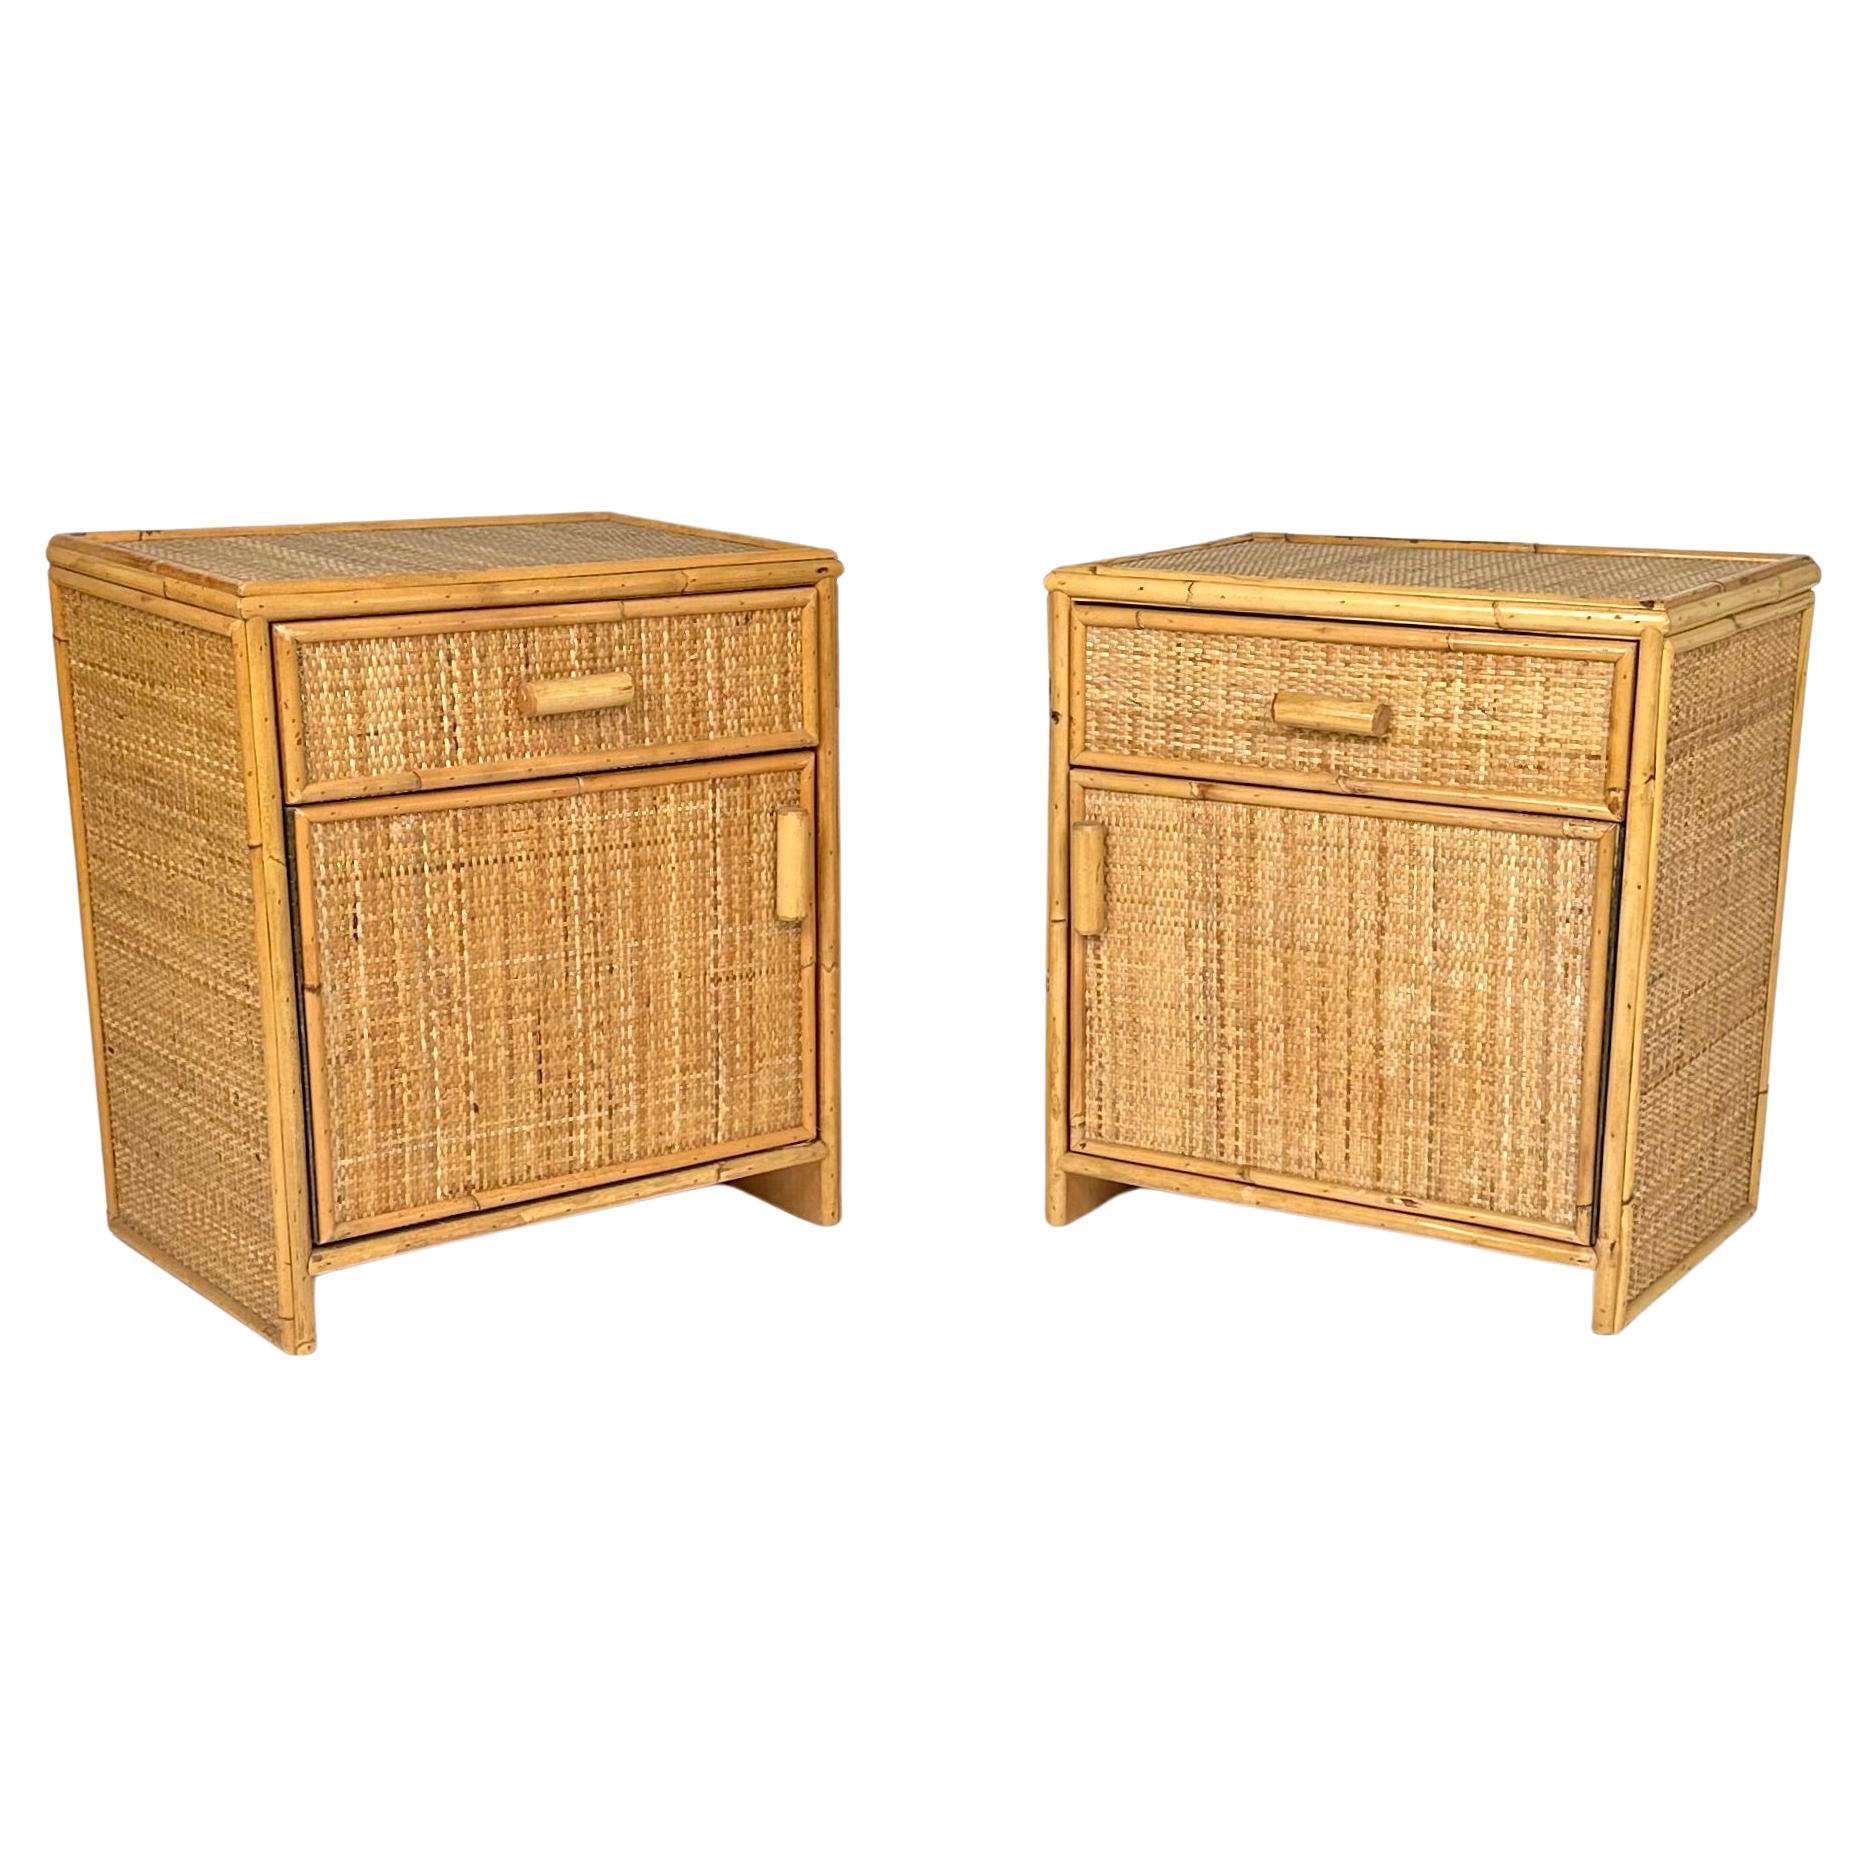 Midcentury Pair of Bedside Tables Nightstands in Bamboo & Rattan, Italy 1970s For Sale